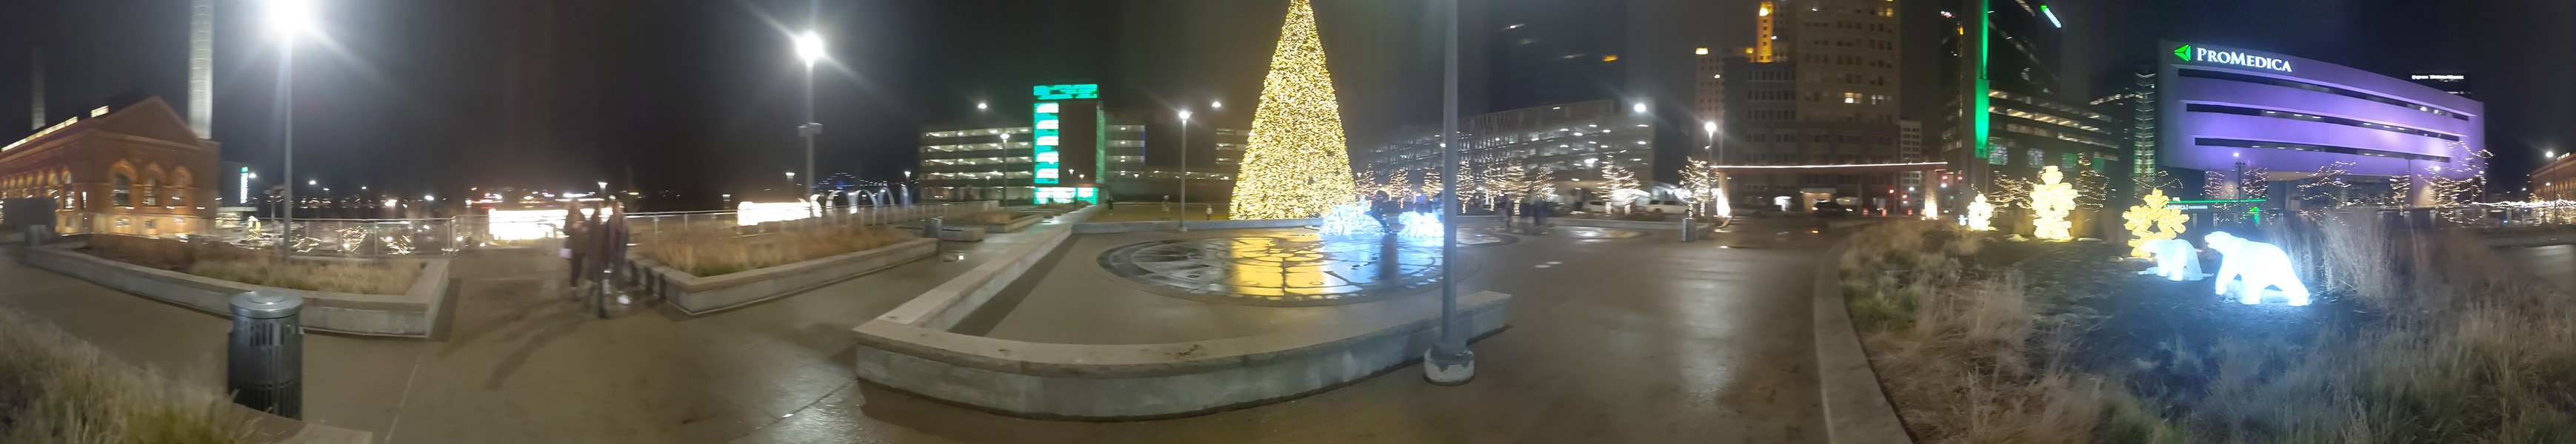 A panoramic night shot of downtown Toledo with a lit Christmas tree in the center.